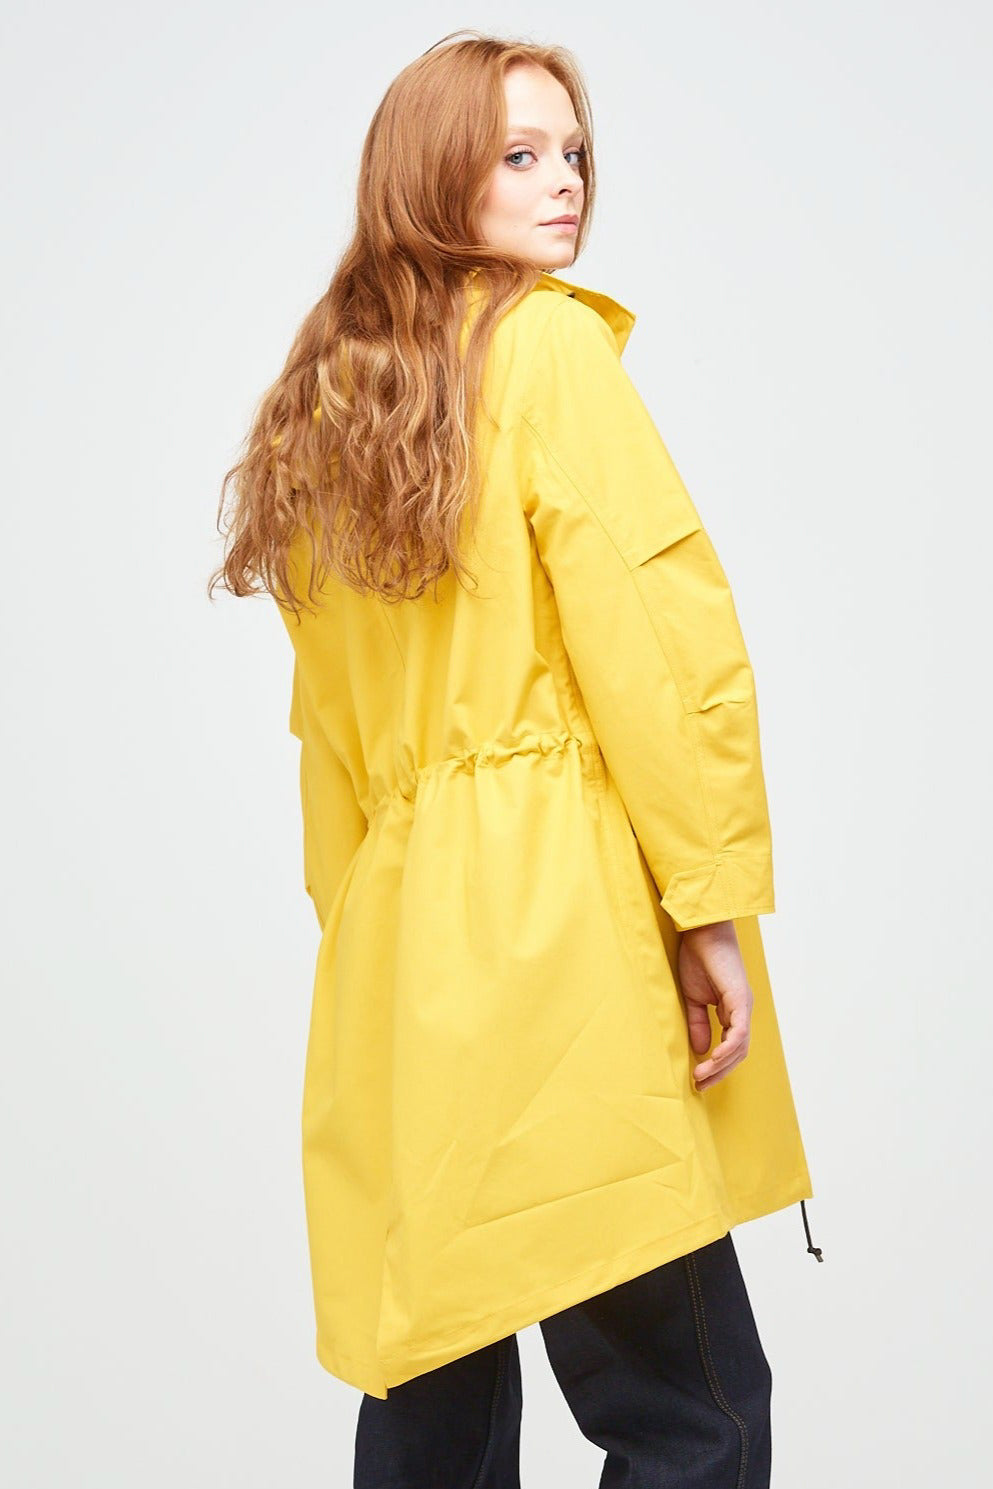 
            rear shot of a young, white female model with ginger hair wearing long yellow parka. The parka is styled with indigo jeans and a white trainer.